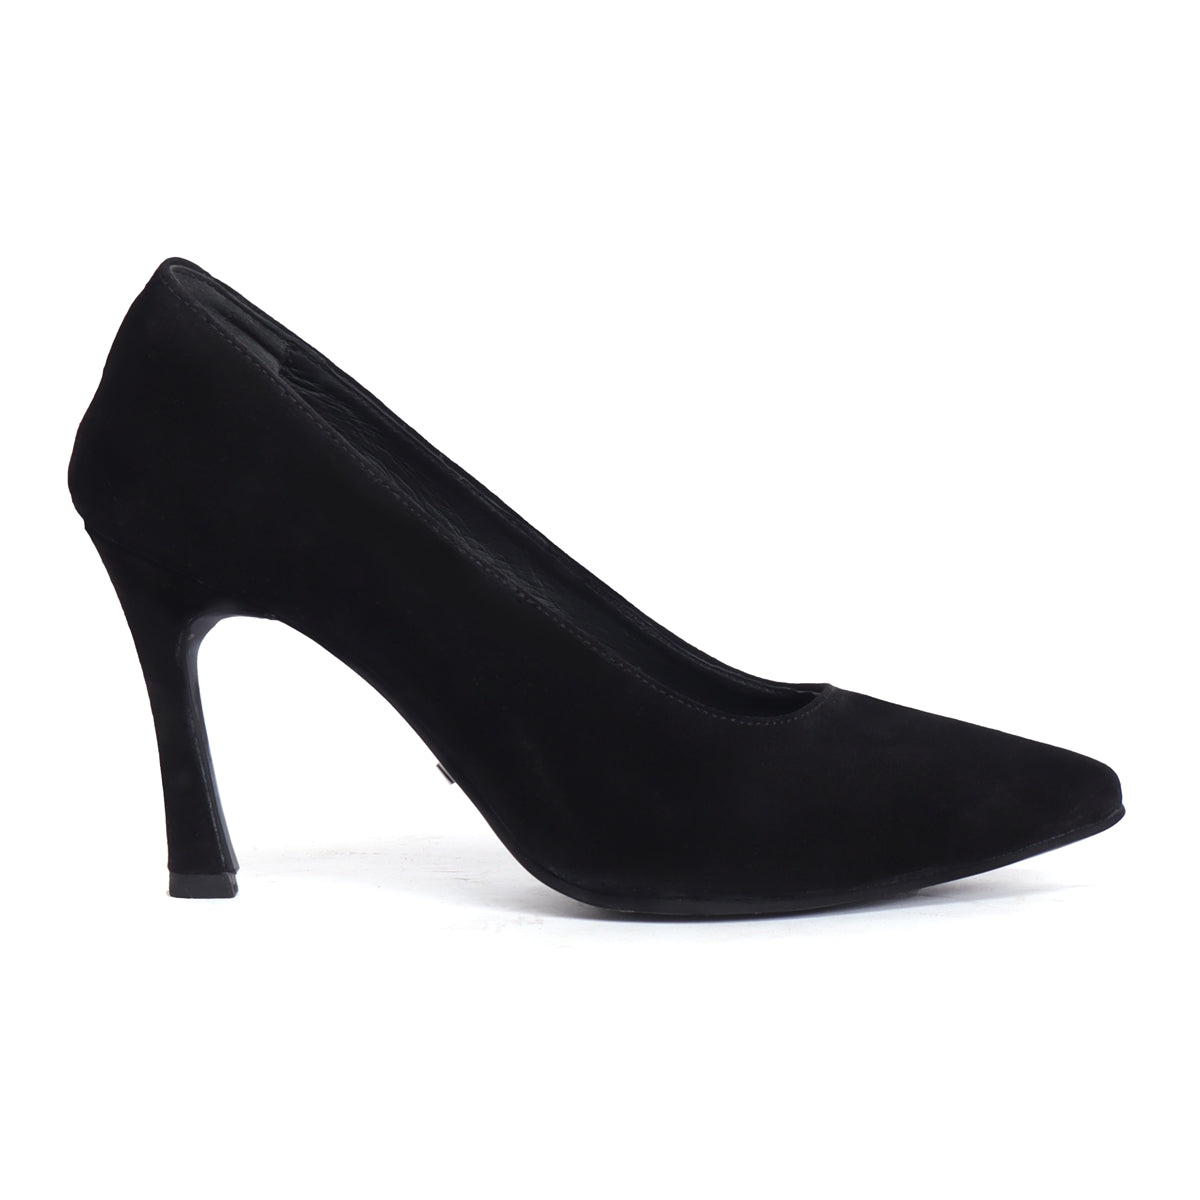 Buy black pencil heels with ankle strap in India @ Limeroad